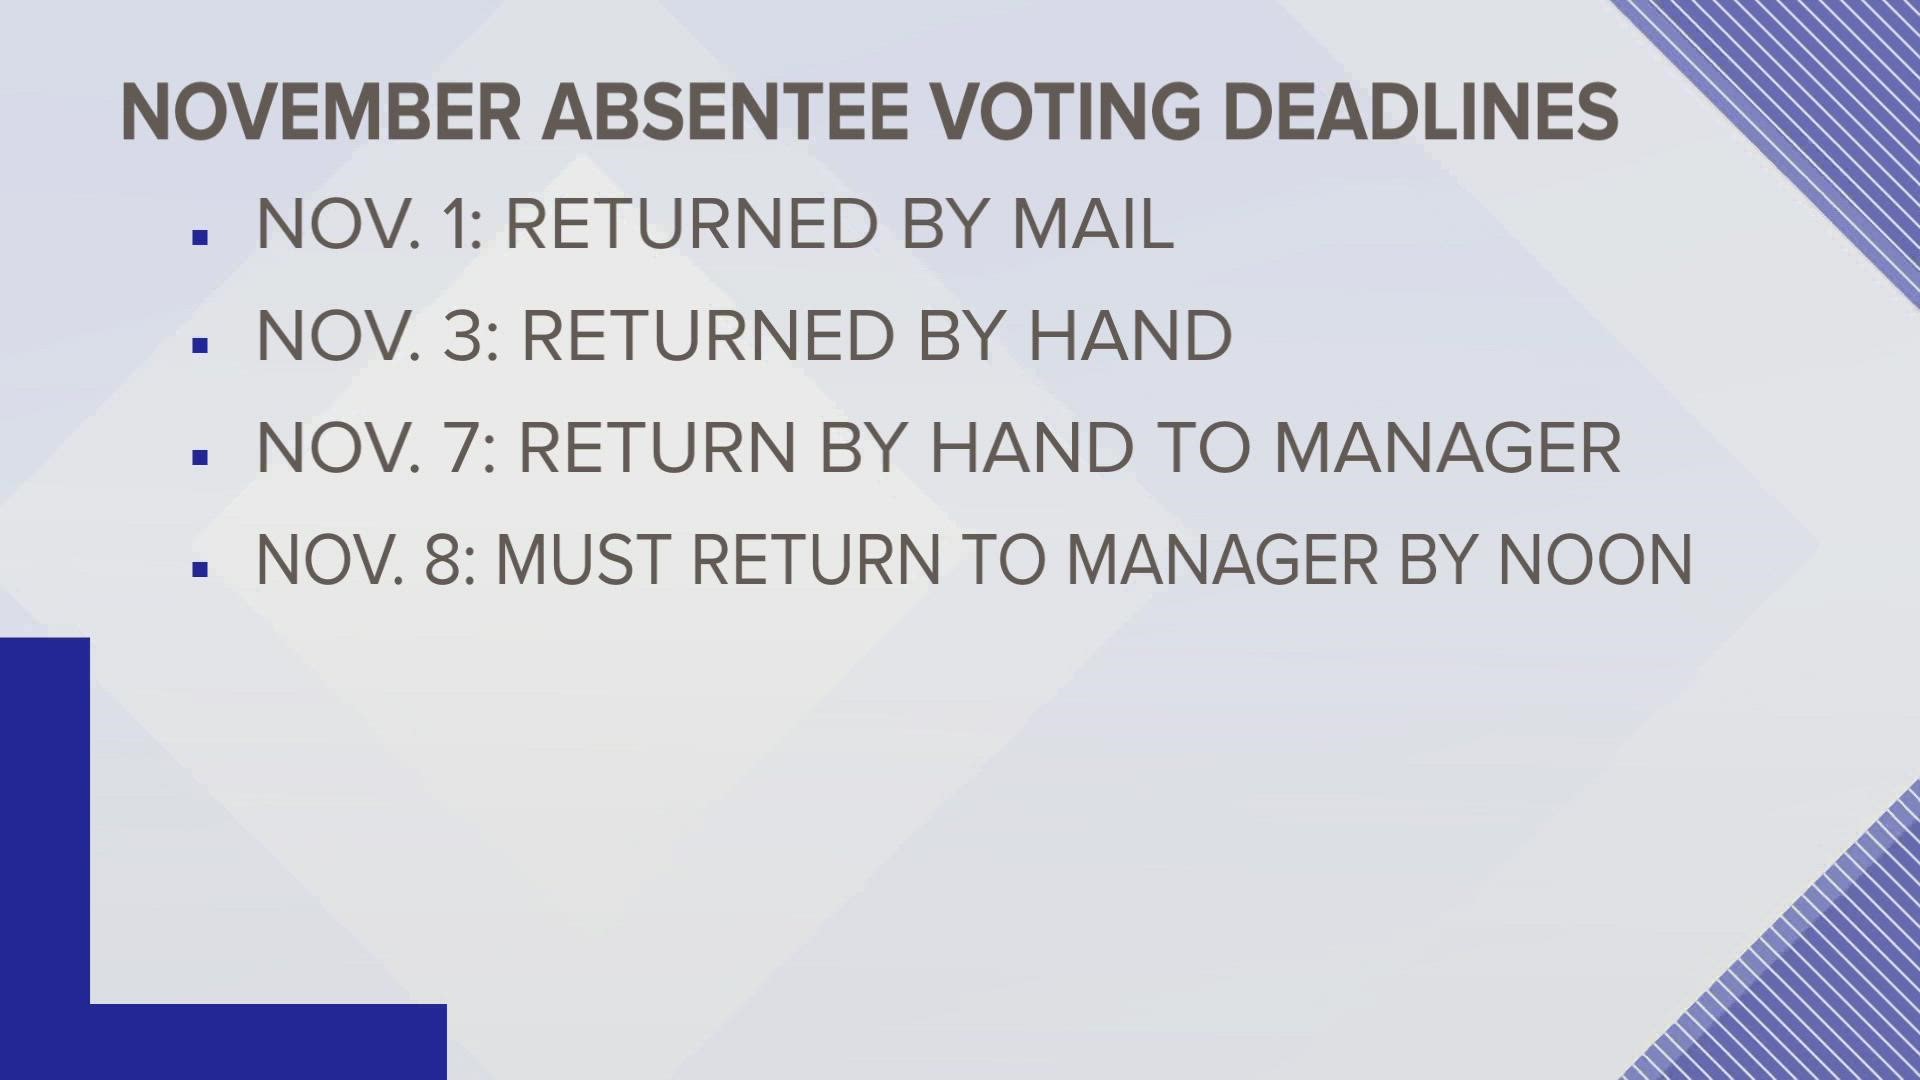 Absentee November voting deadlines are coming up fast. Here's what you need to know.